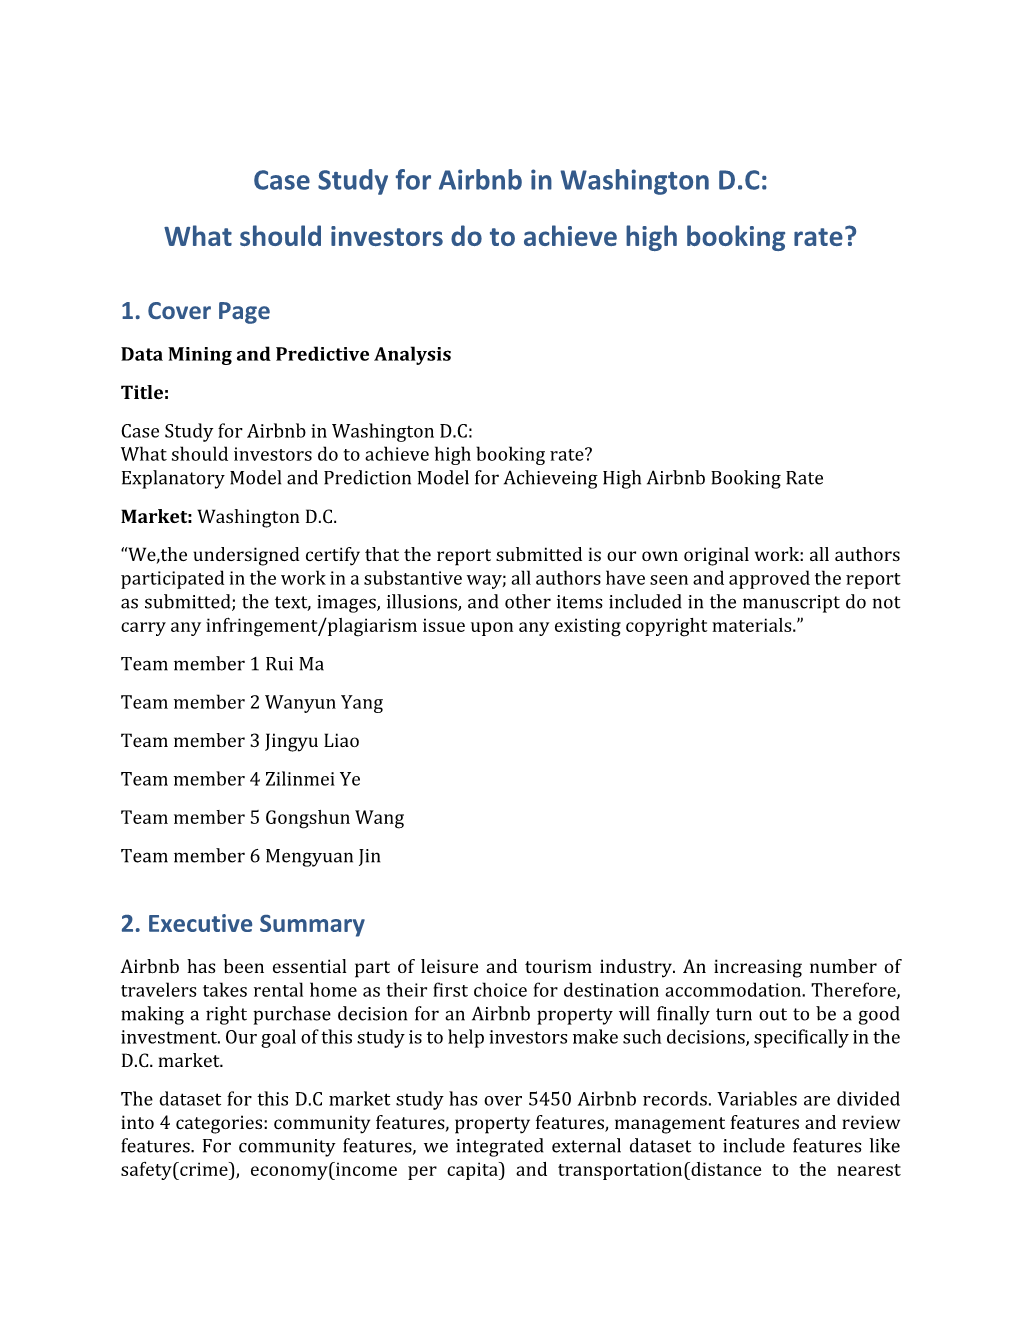 Case Study for Airbnb in Washington DC